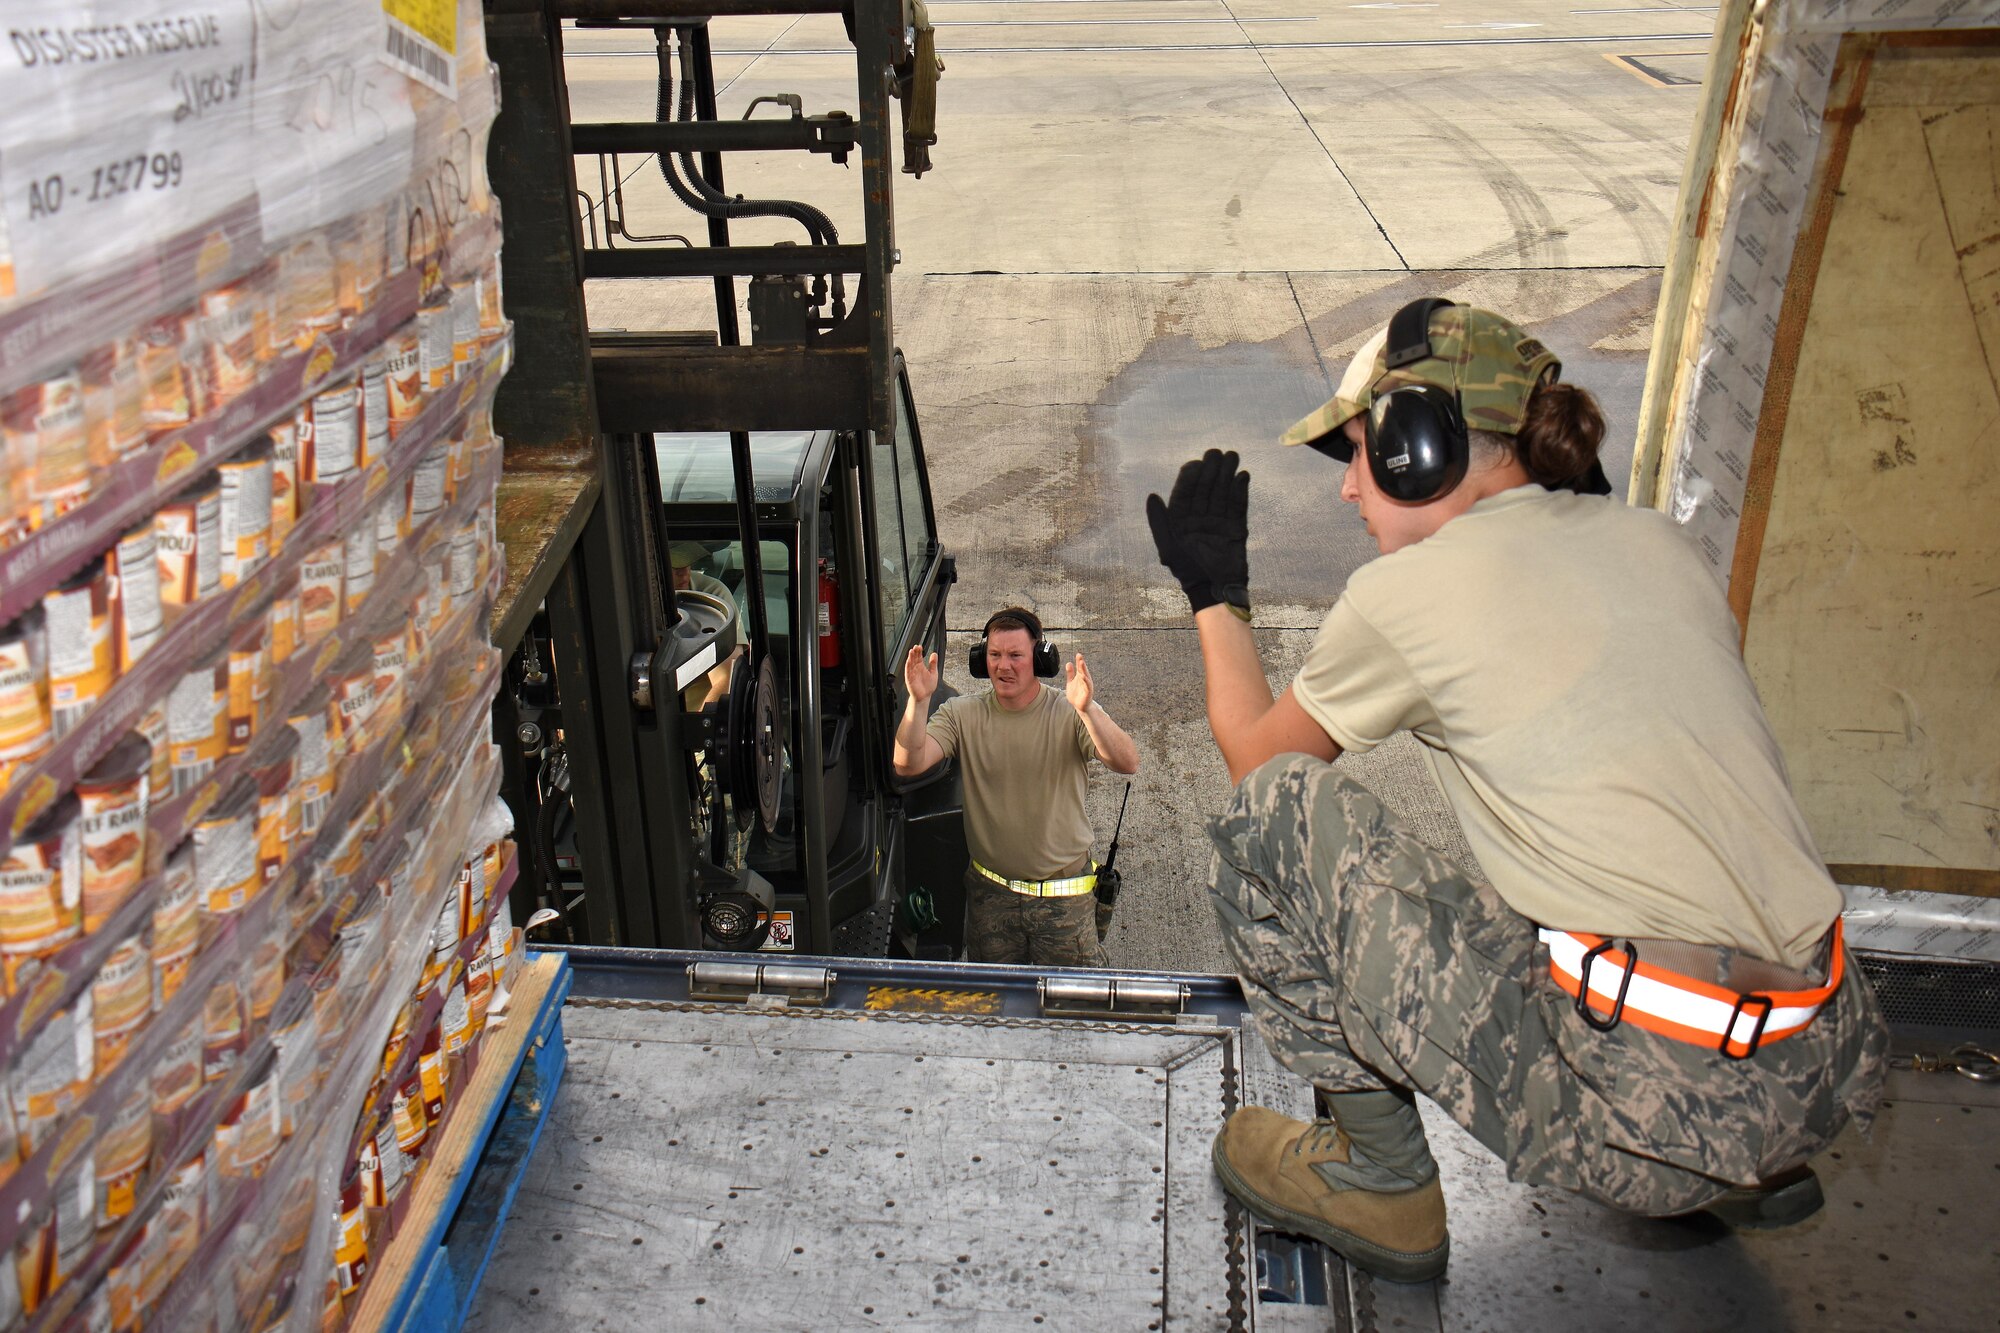 Air transportation specialist Staff Sgt. Heather Boutin with the Air National Guard's 133rd Airlift Wing in Minneapolis, Minnesota, directs the offload of food and supplies pallets at Cyril E. King Airport in St. Thomas, U.S. Virgin Islands, Sept. 15, 2017. 133rd AW personnel joined Airmen assigned to the 161st Air Refueling Wing in Phoenix, Arizona, and 146th Airlift Wing in Camarillo, California to manage air operations at the storm damaged airport in St. Thomas in the wake of Hurricane Irma. (U.S. Air National Guard photo by Master Sgt. Paul Gorman)